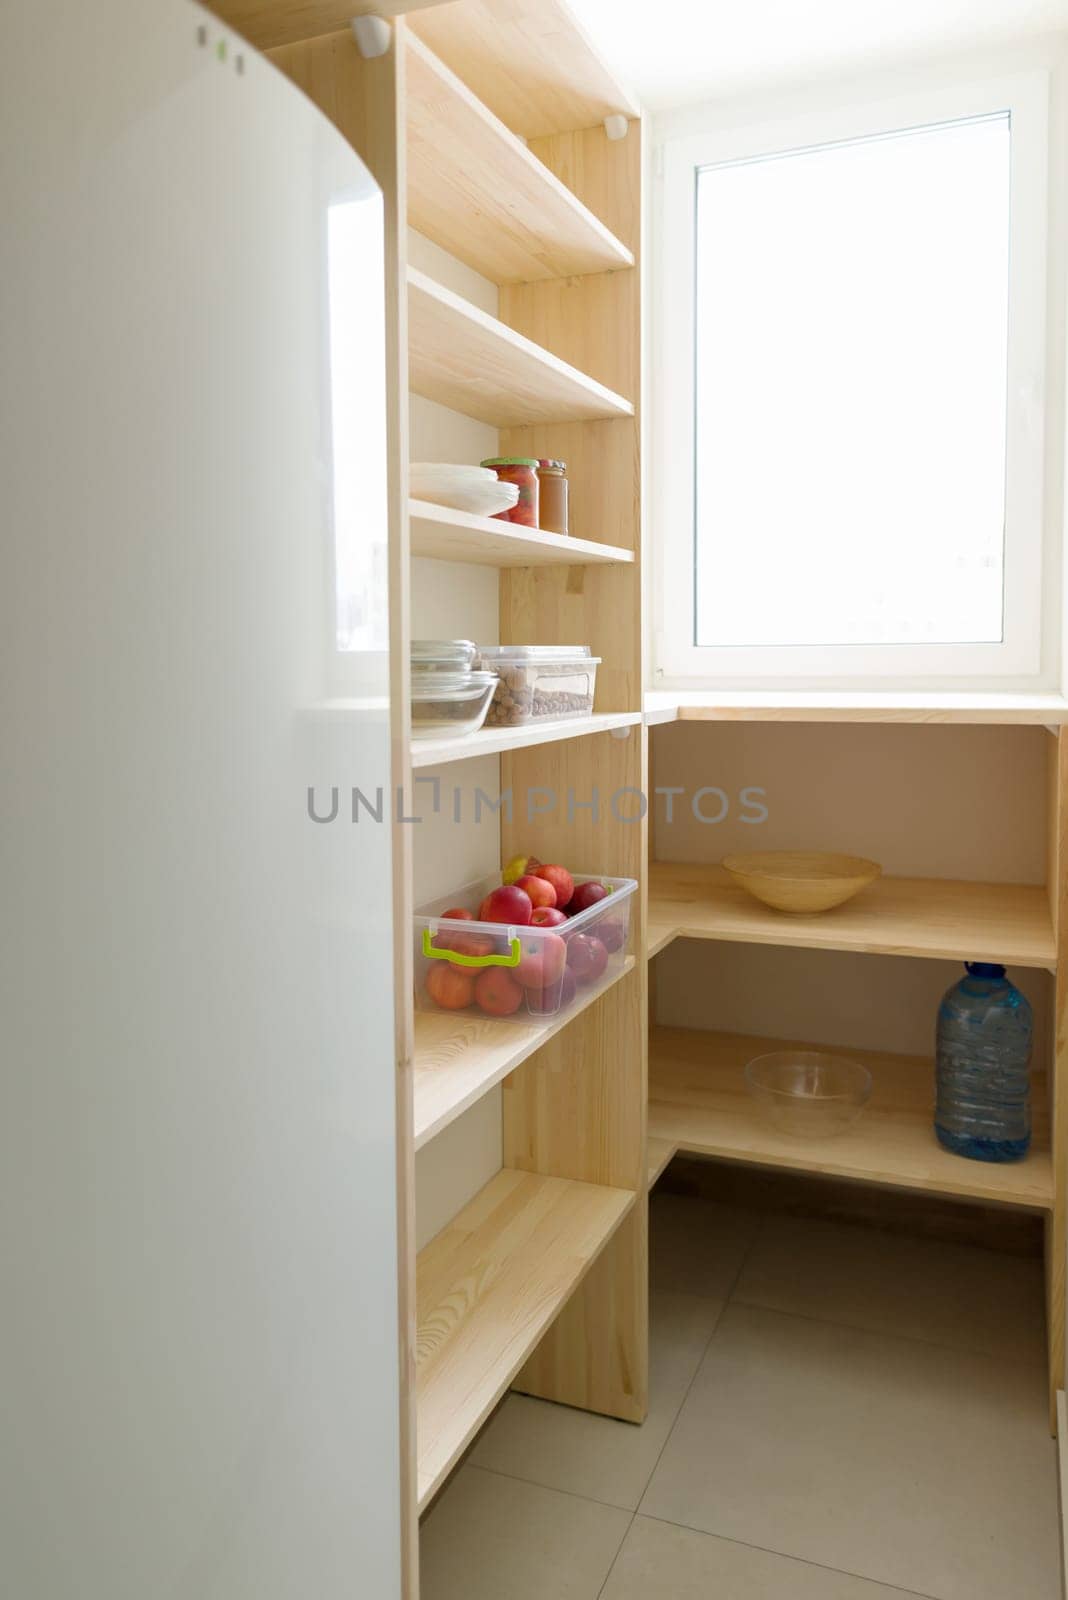 Food storage, wooden shelves in the pantry, kitchen utensils by VH-studio